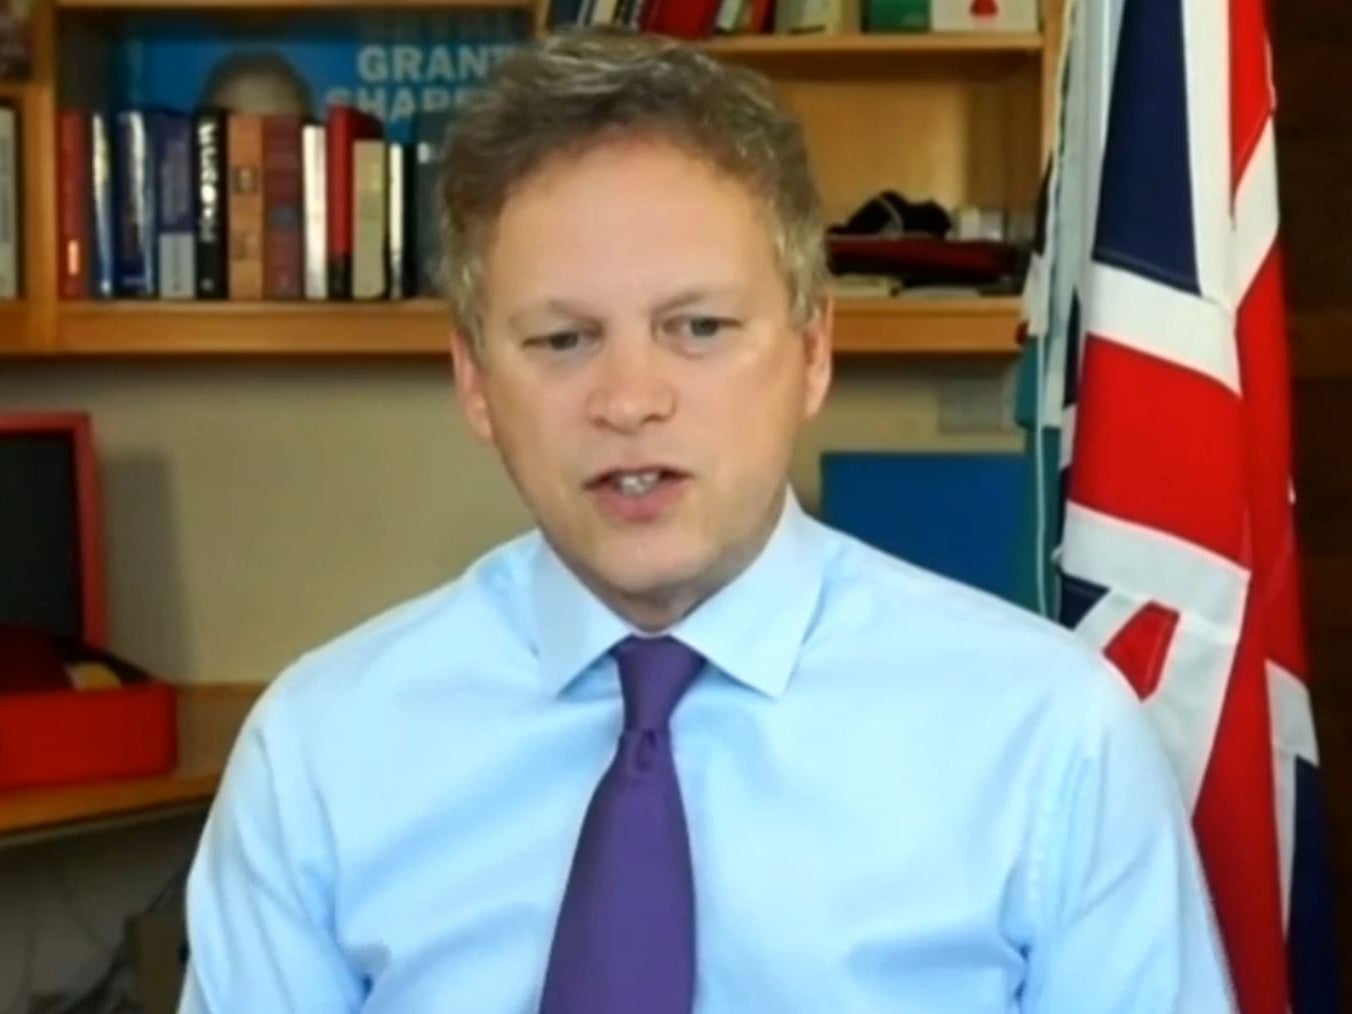 Transport Secretary Grant Shapps gave evidence to the Commons’ Transport Select Committee on Wednesday